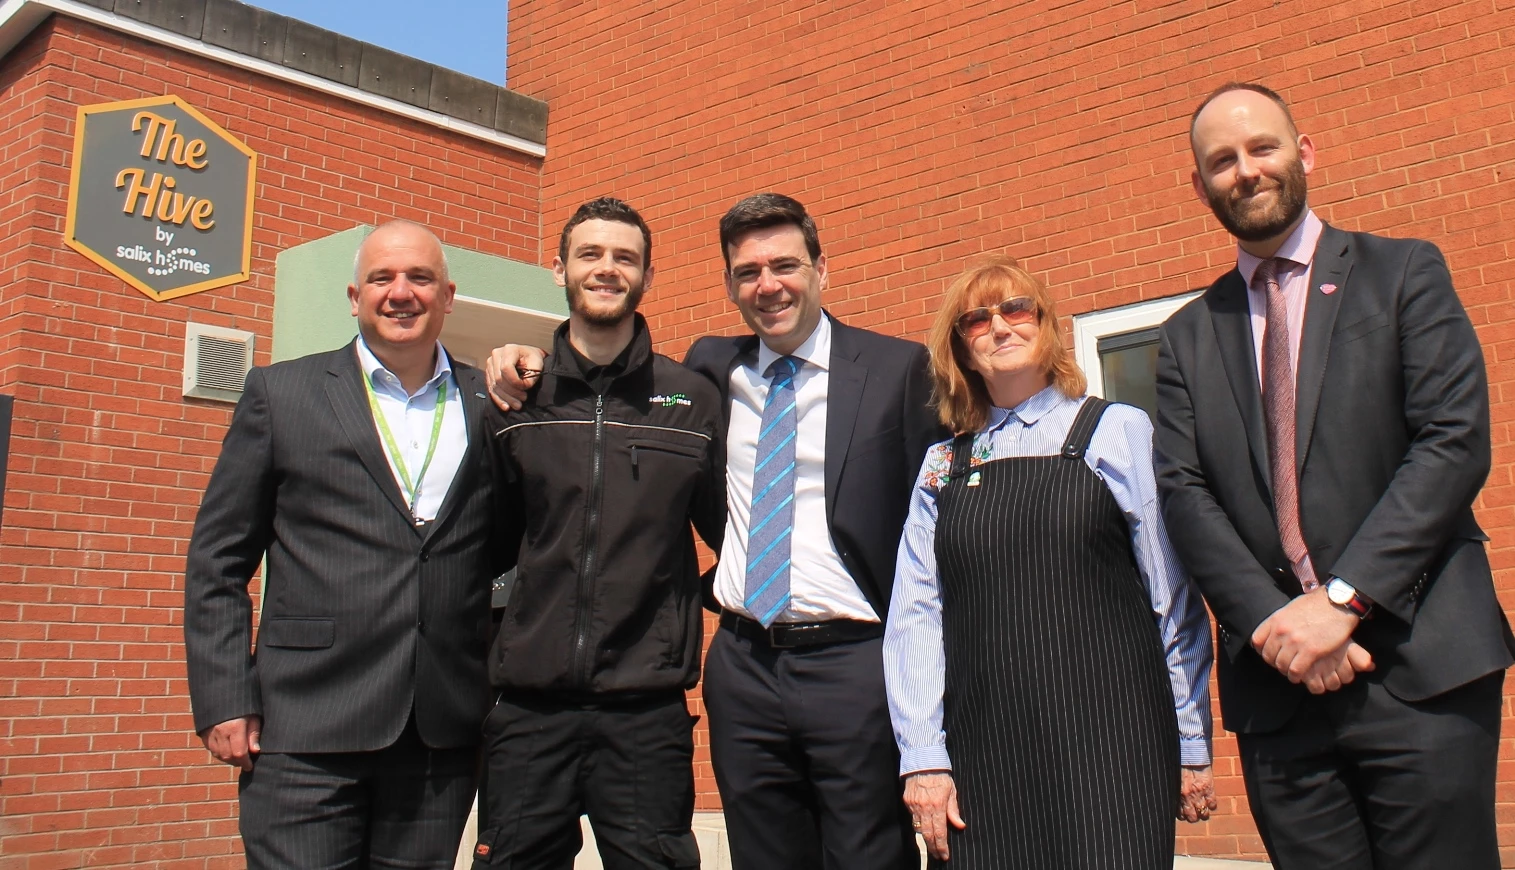 Mayor of Greater Manchester Andy Burnham at the launch of The Hive